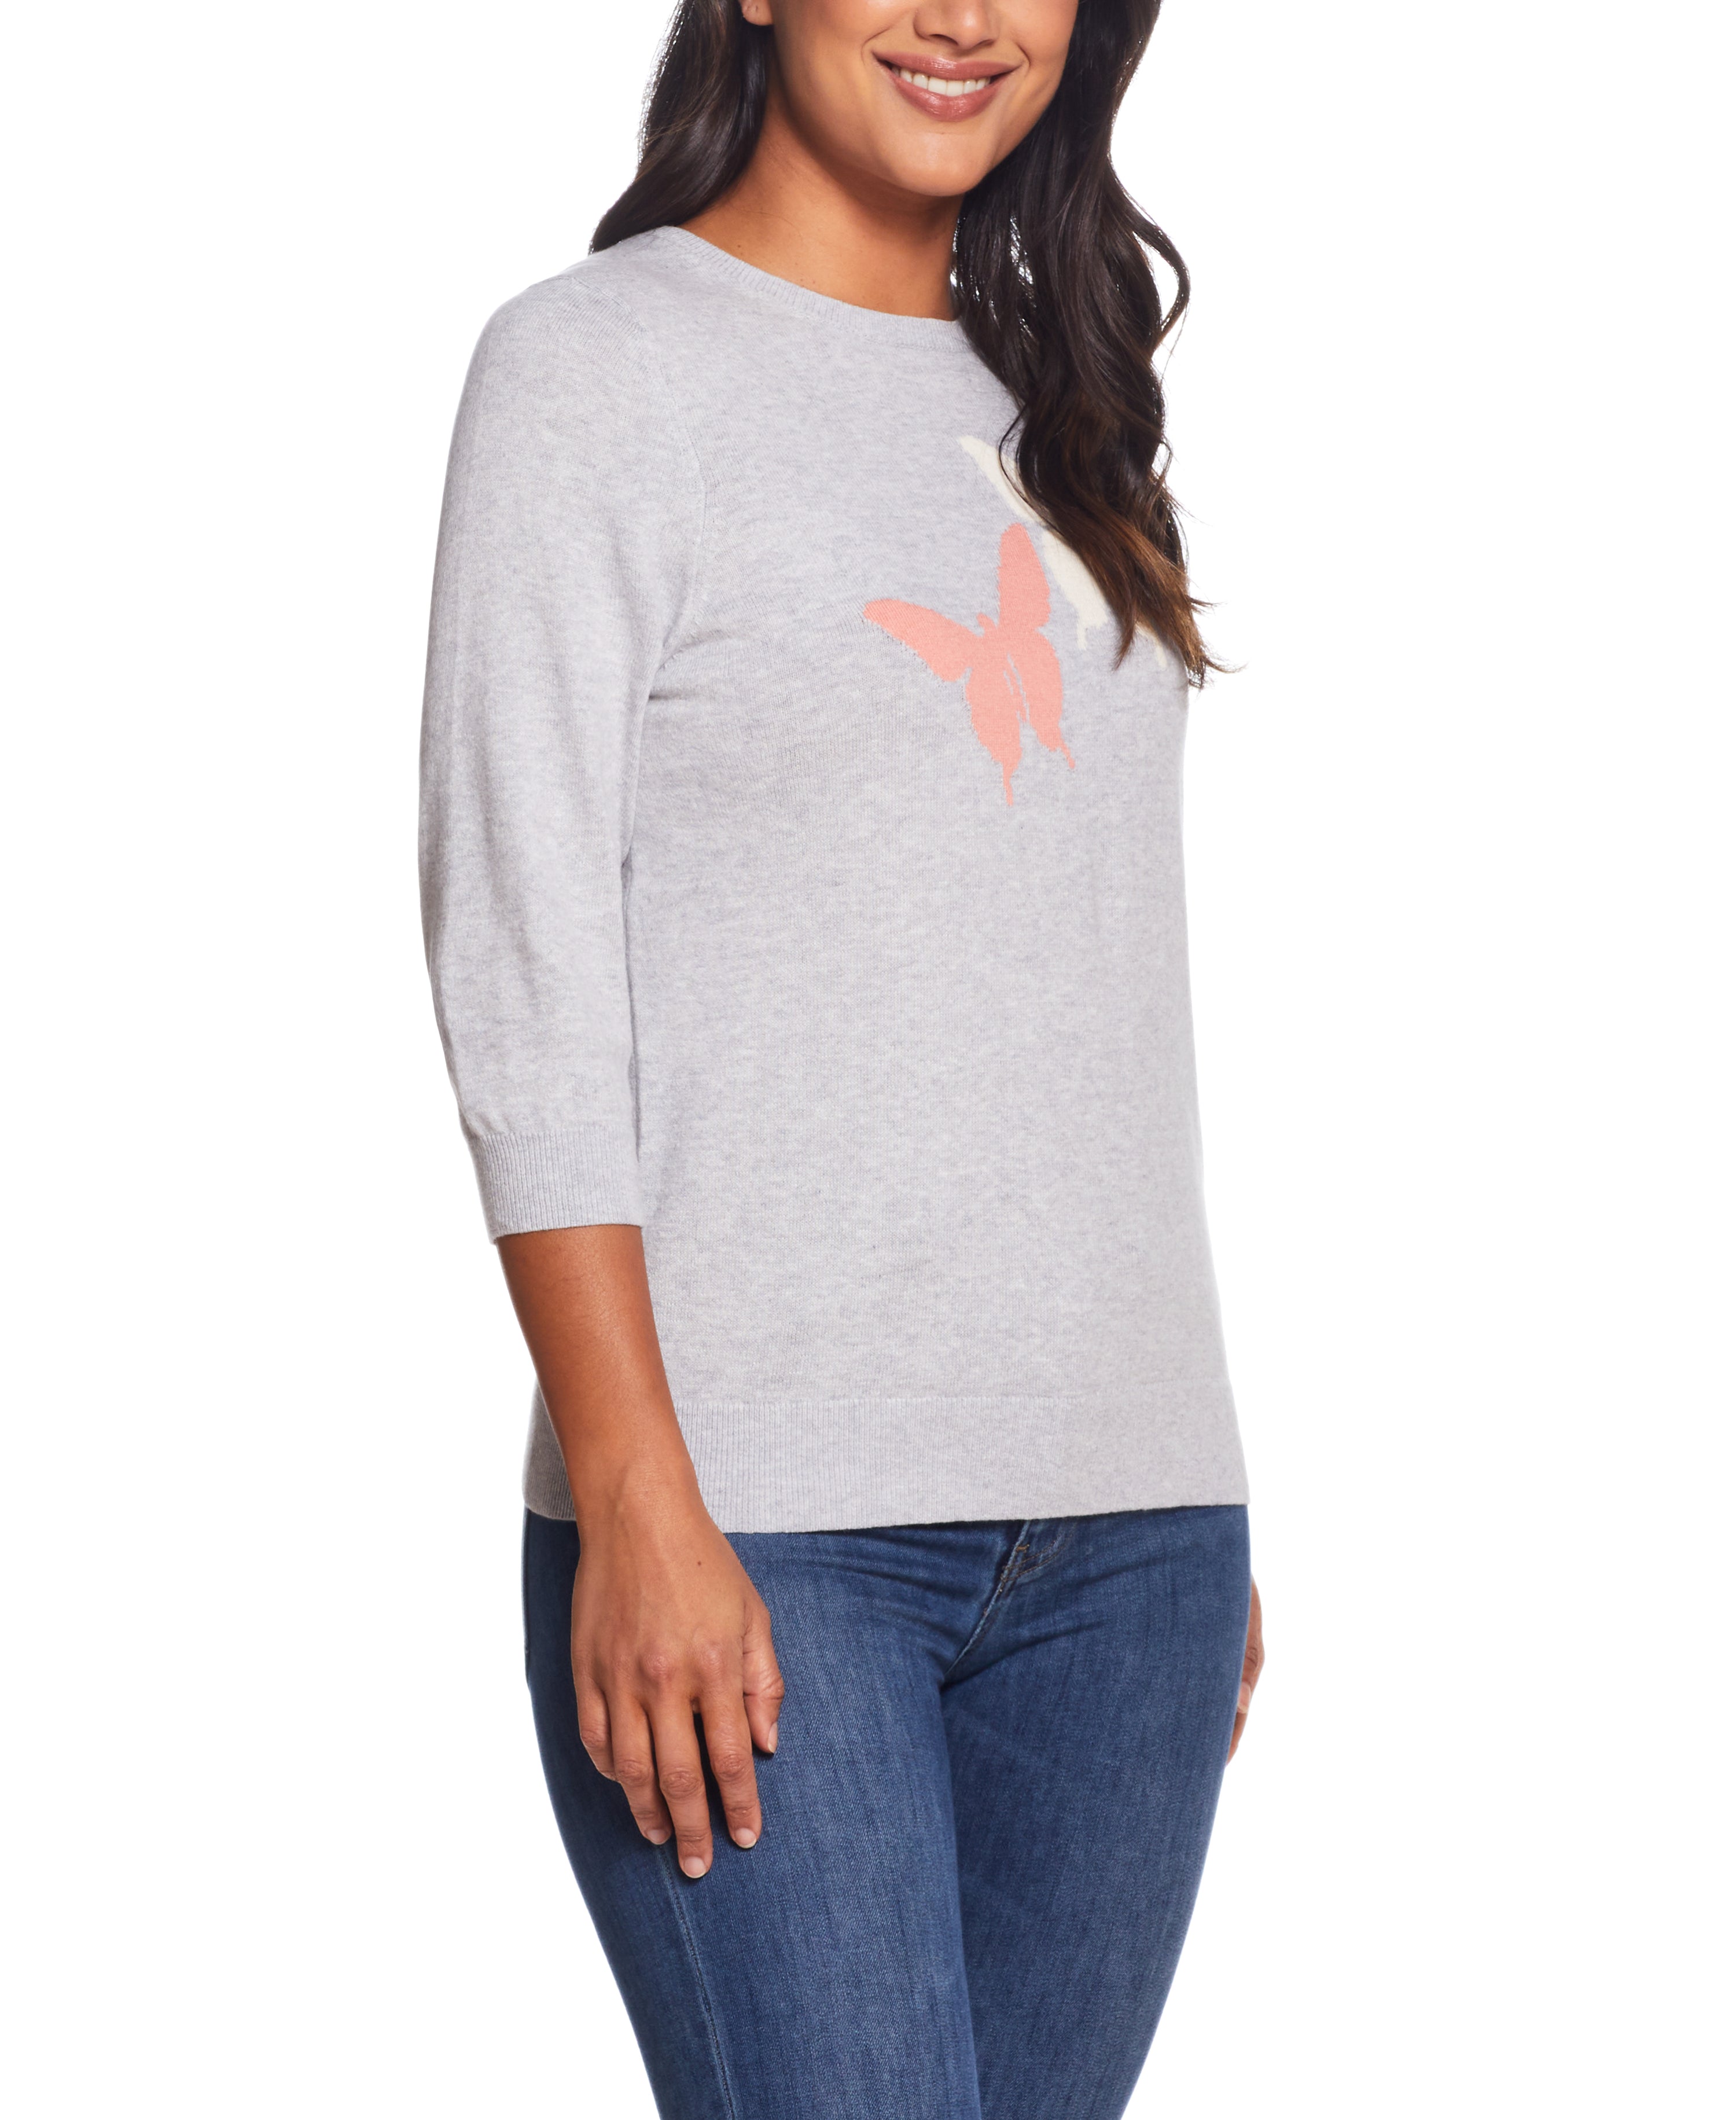 BUTTERFLY COTTON CASHMERE SWEATER in PALE GREY